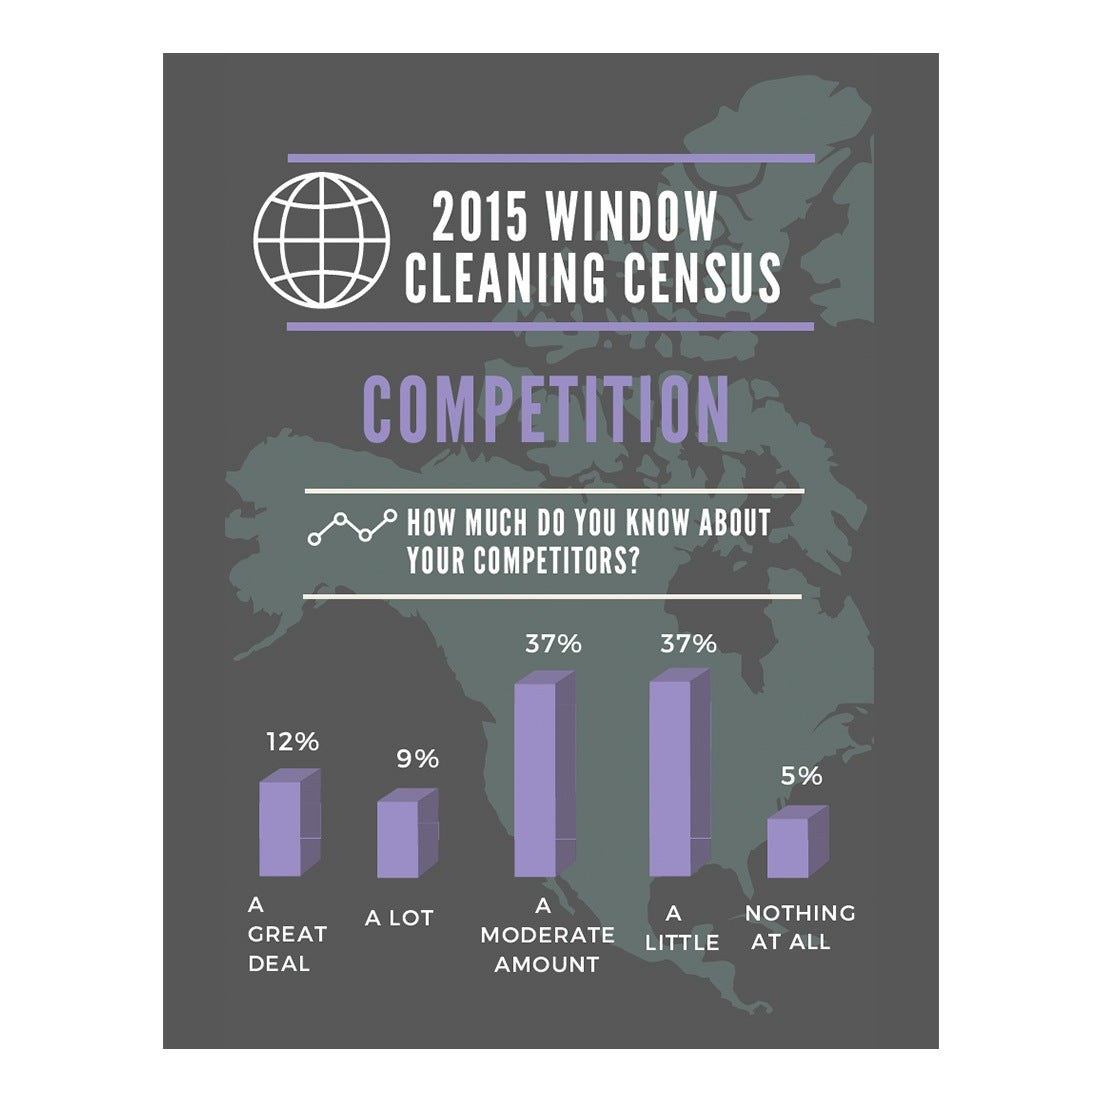 2015 Window Cleaning Census Competition